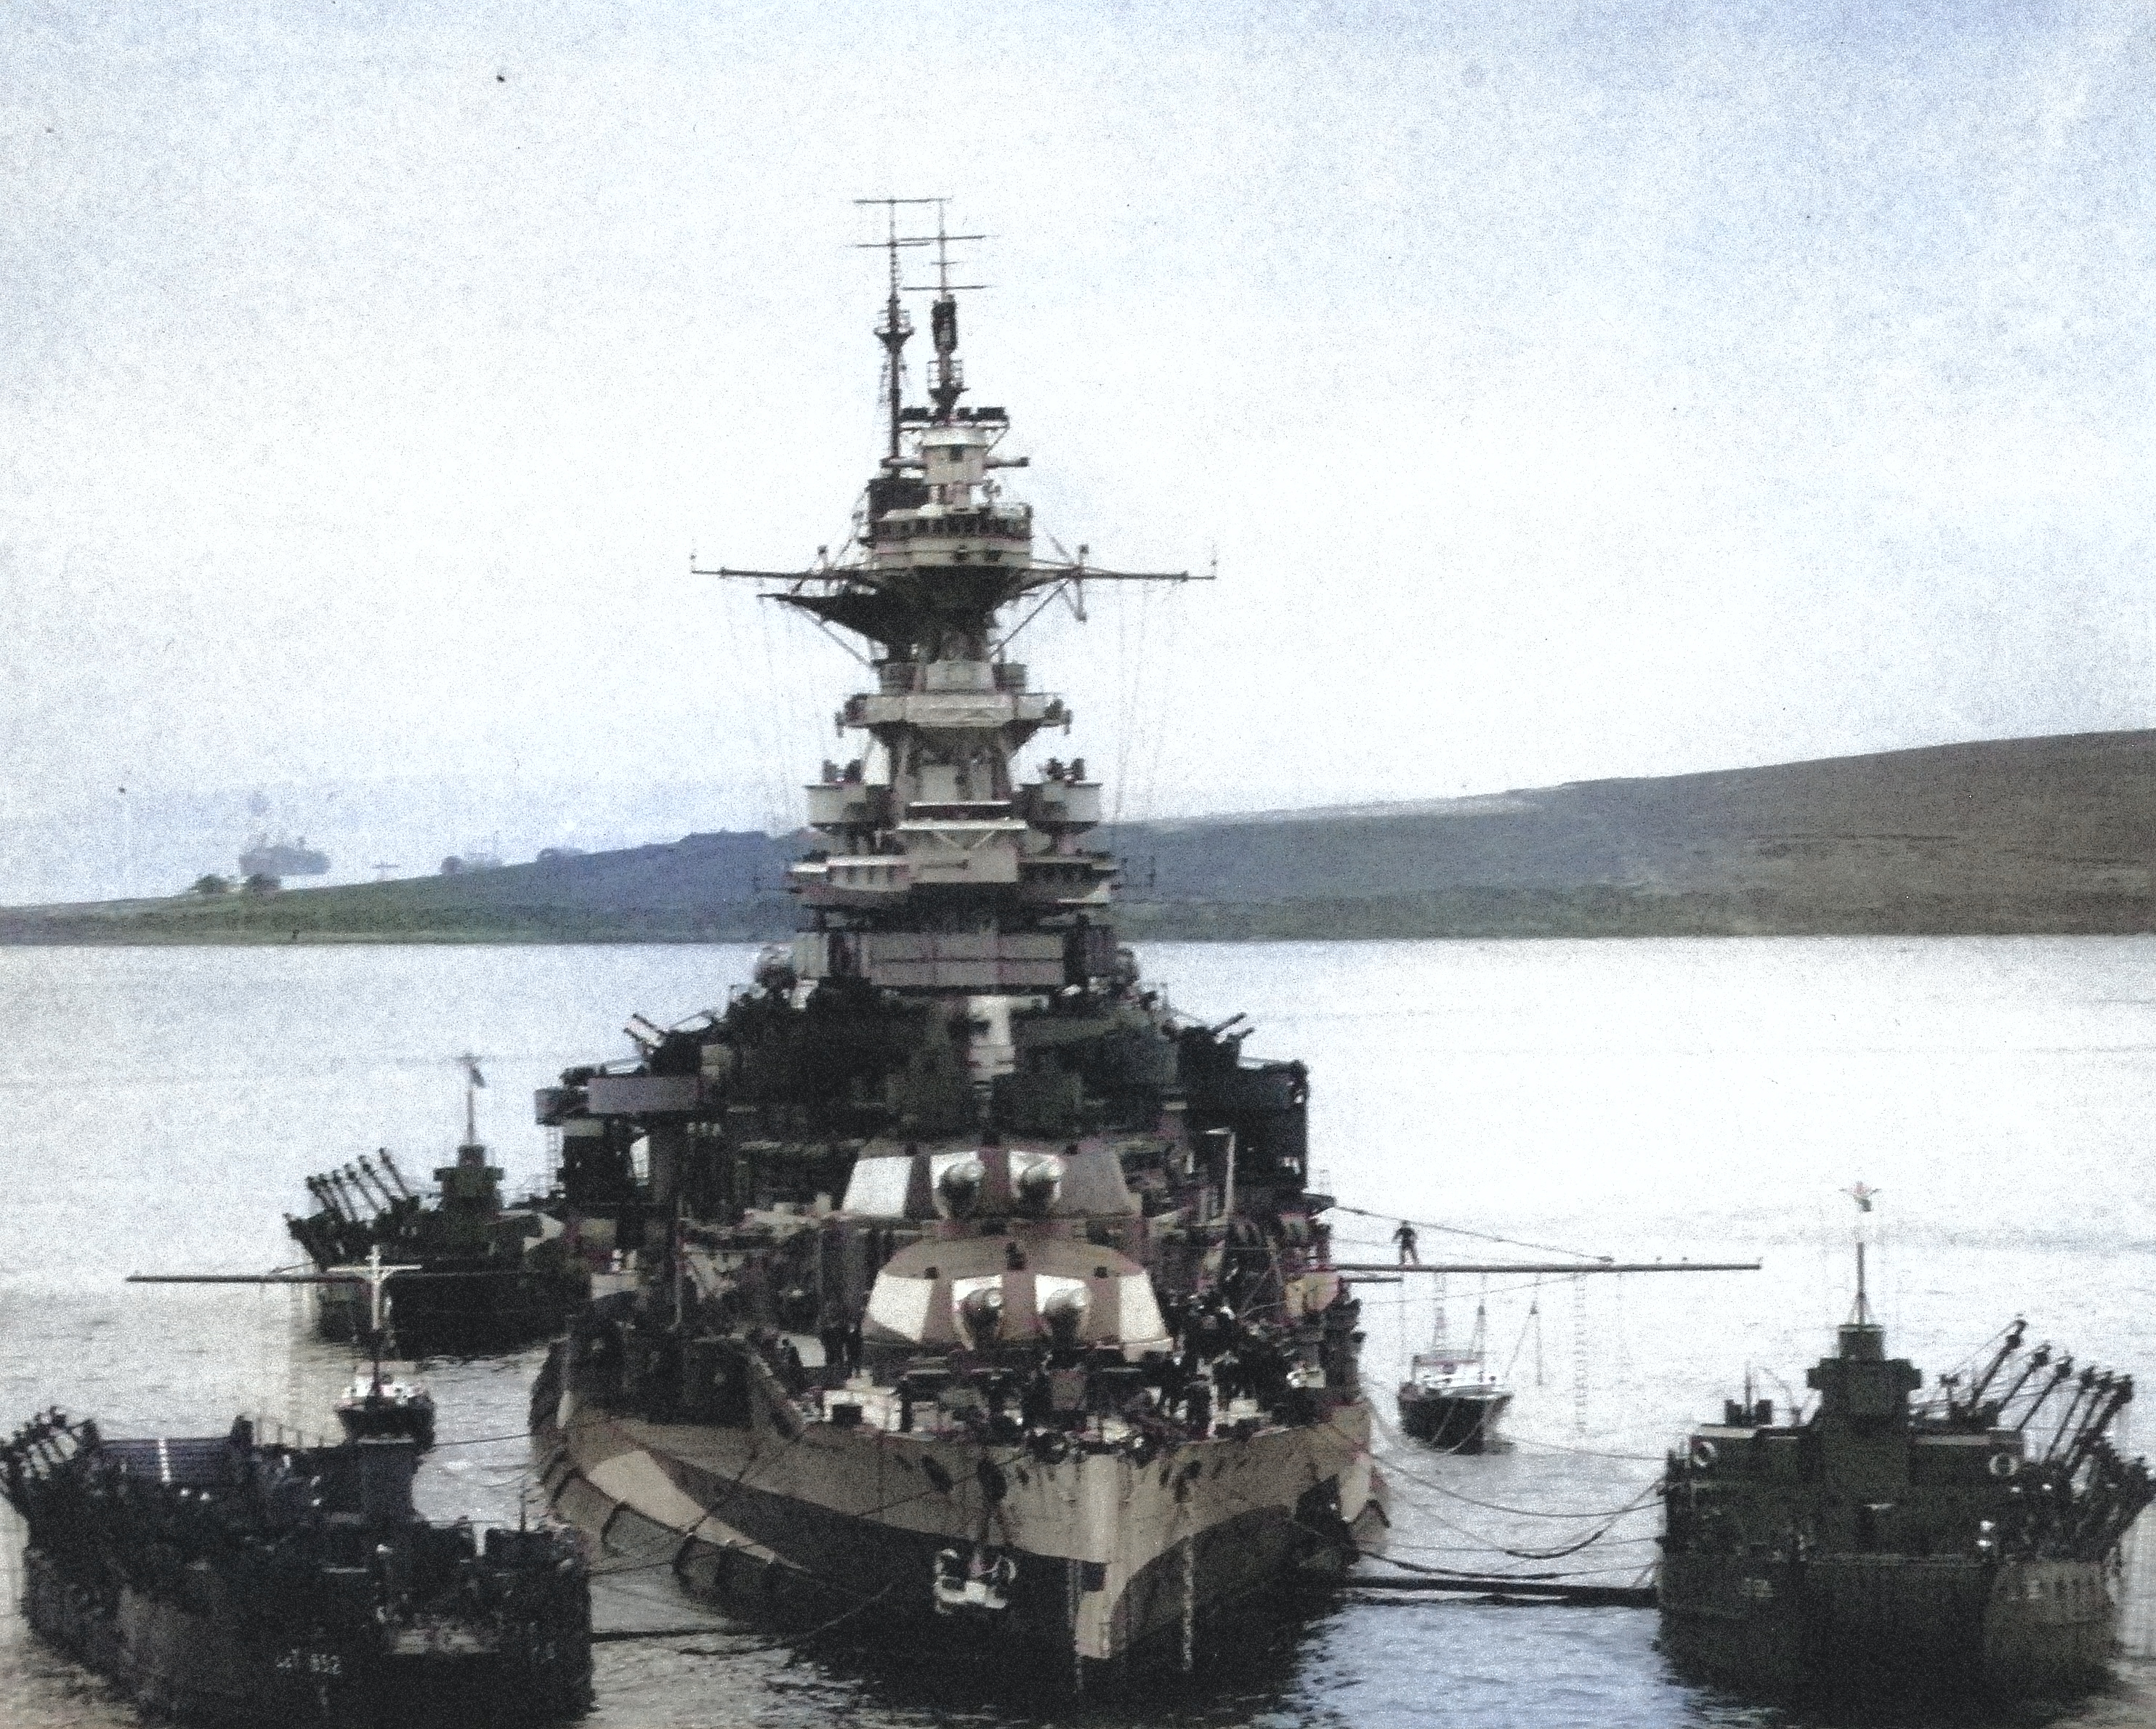 Battleship HMS Malaya at anchor in Gutter Sound, Scapa Flow, Orkney Islands, Scotland, United Kingdom, Aug 1943. [Colorized by WW2DB]